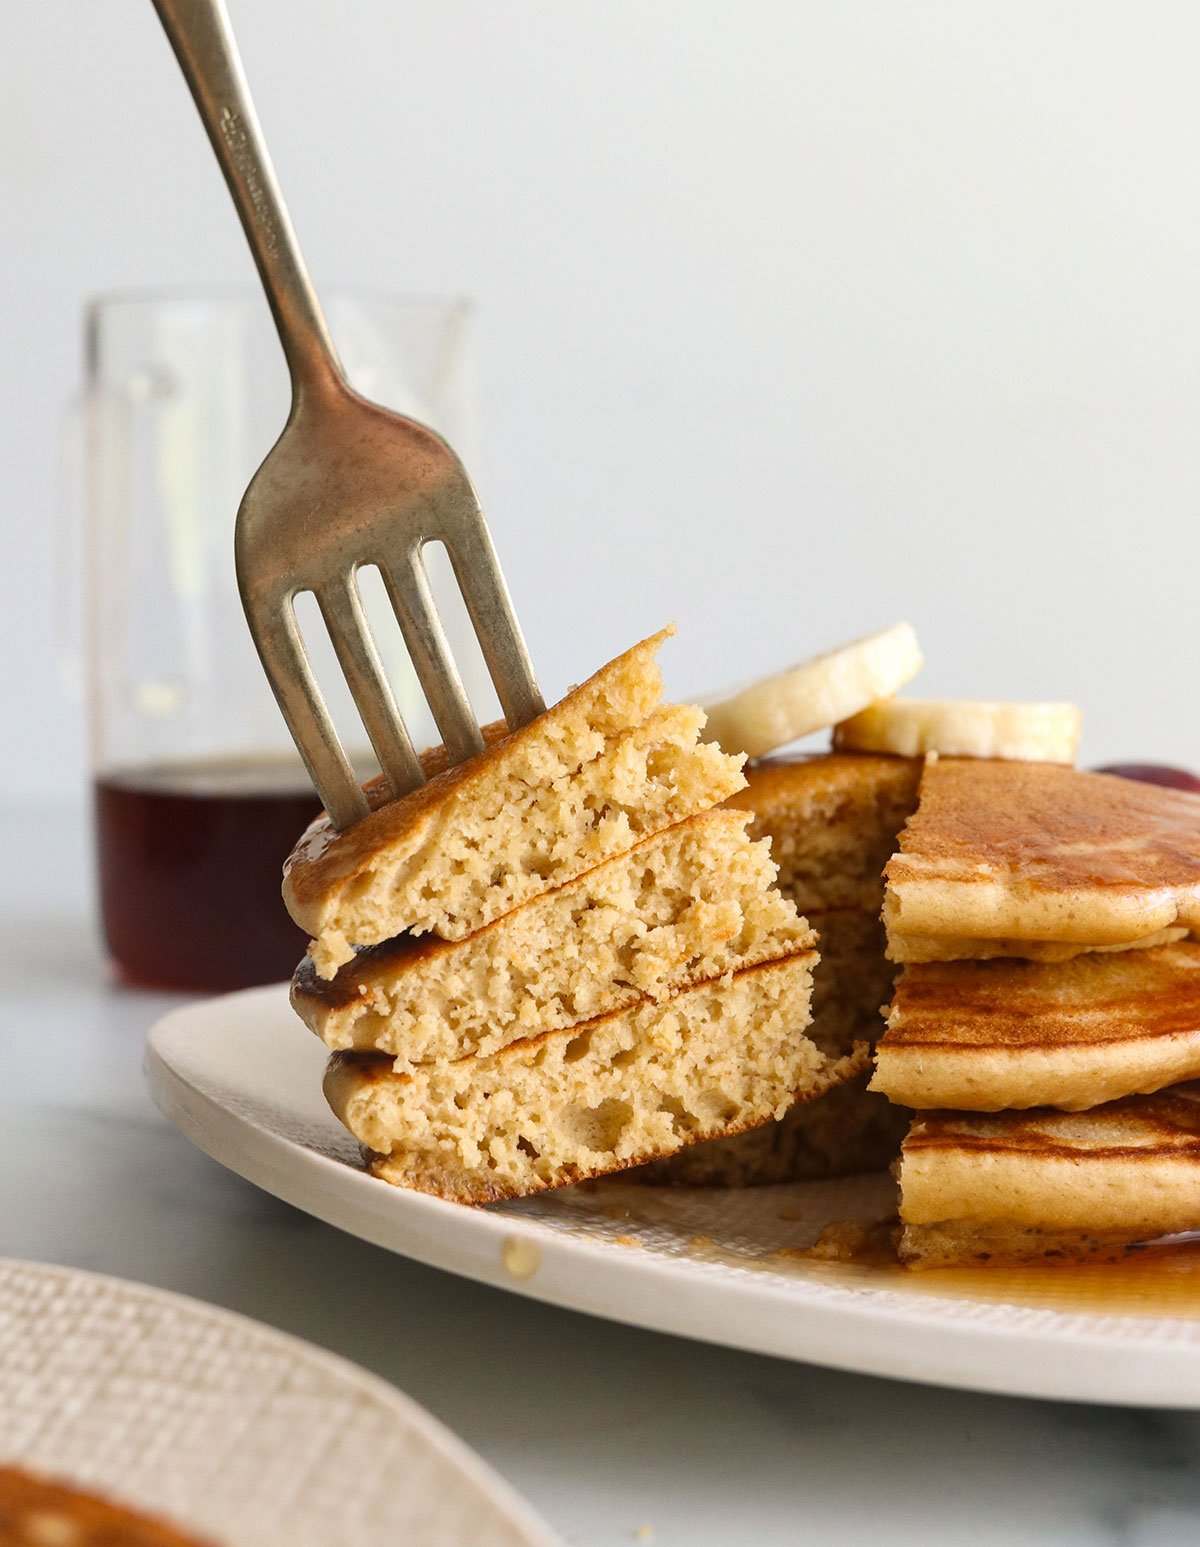 forkful of oat pancakes lifted from a stack.